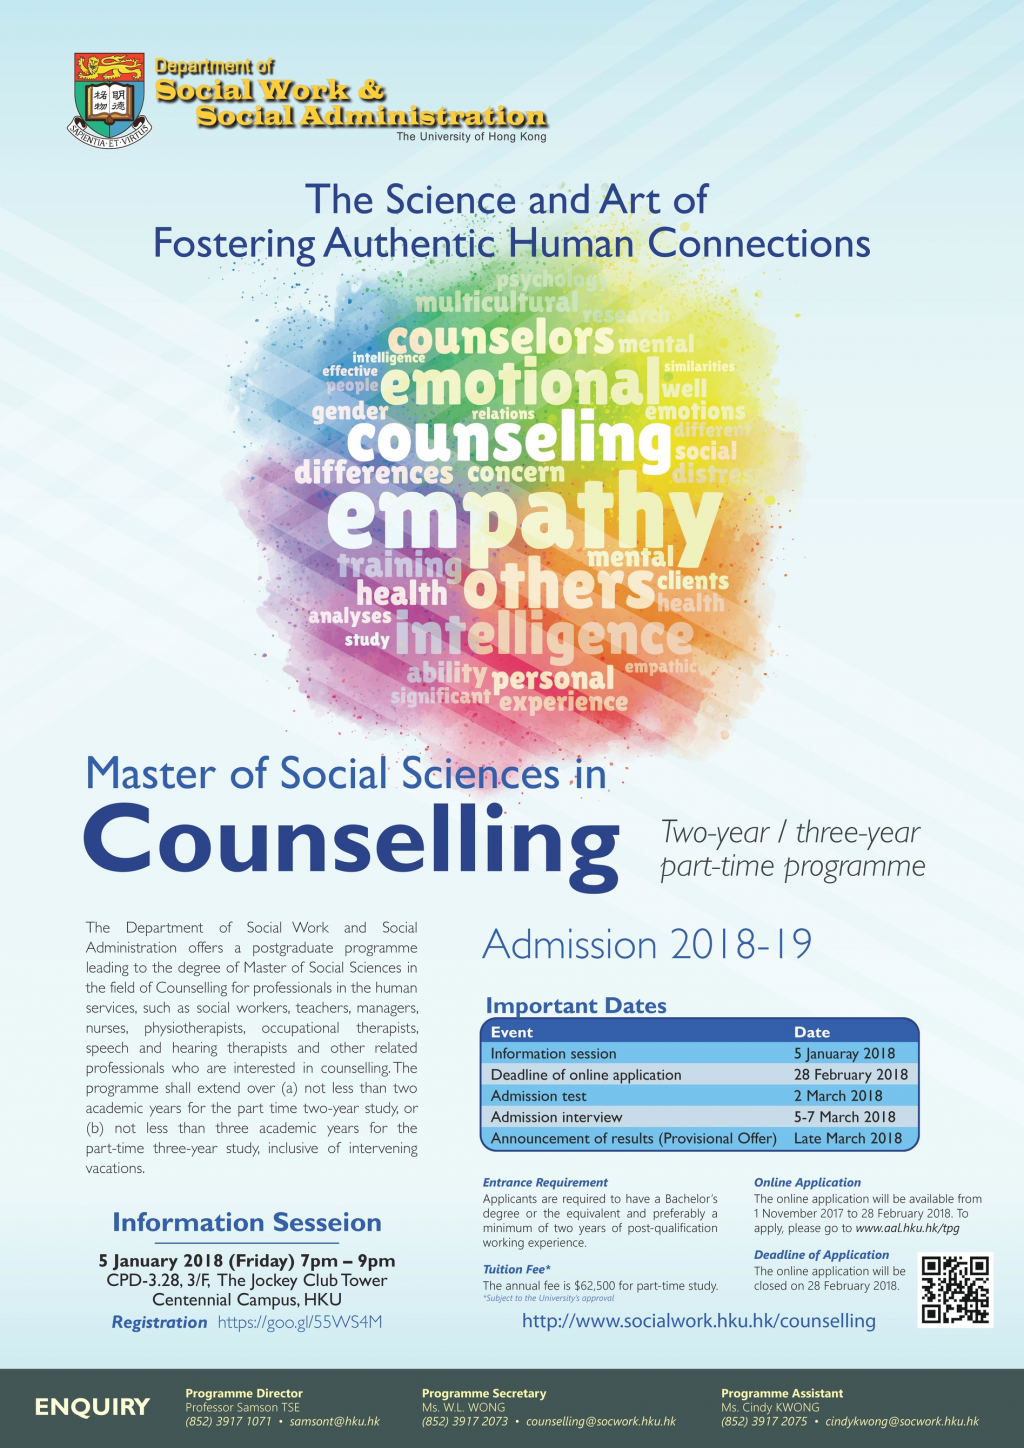 MSocSc(Counselling) Programme